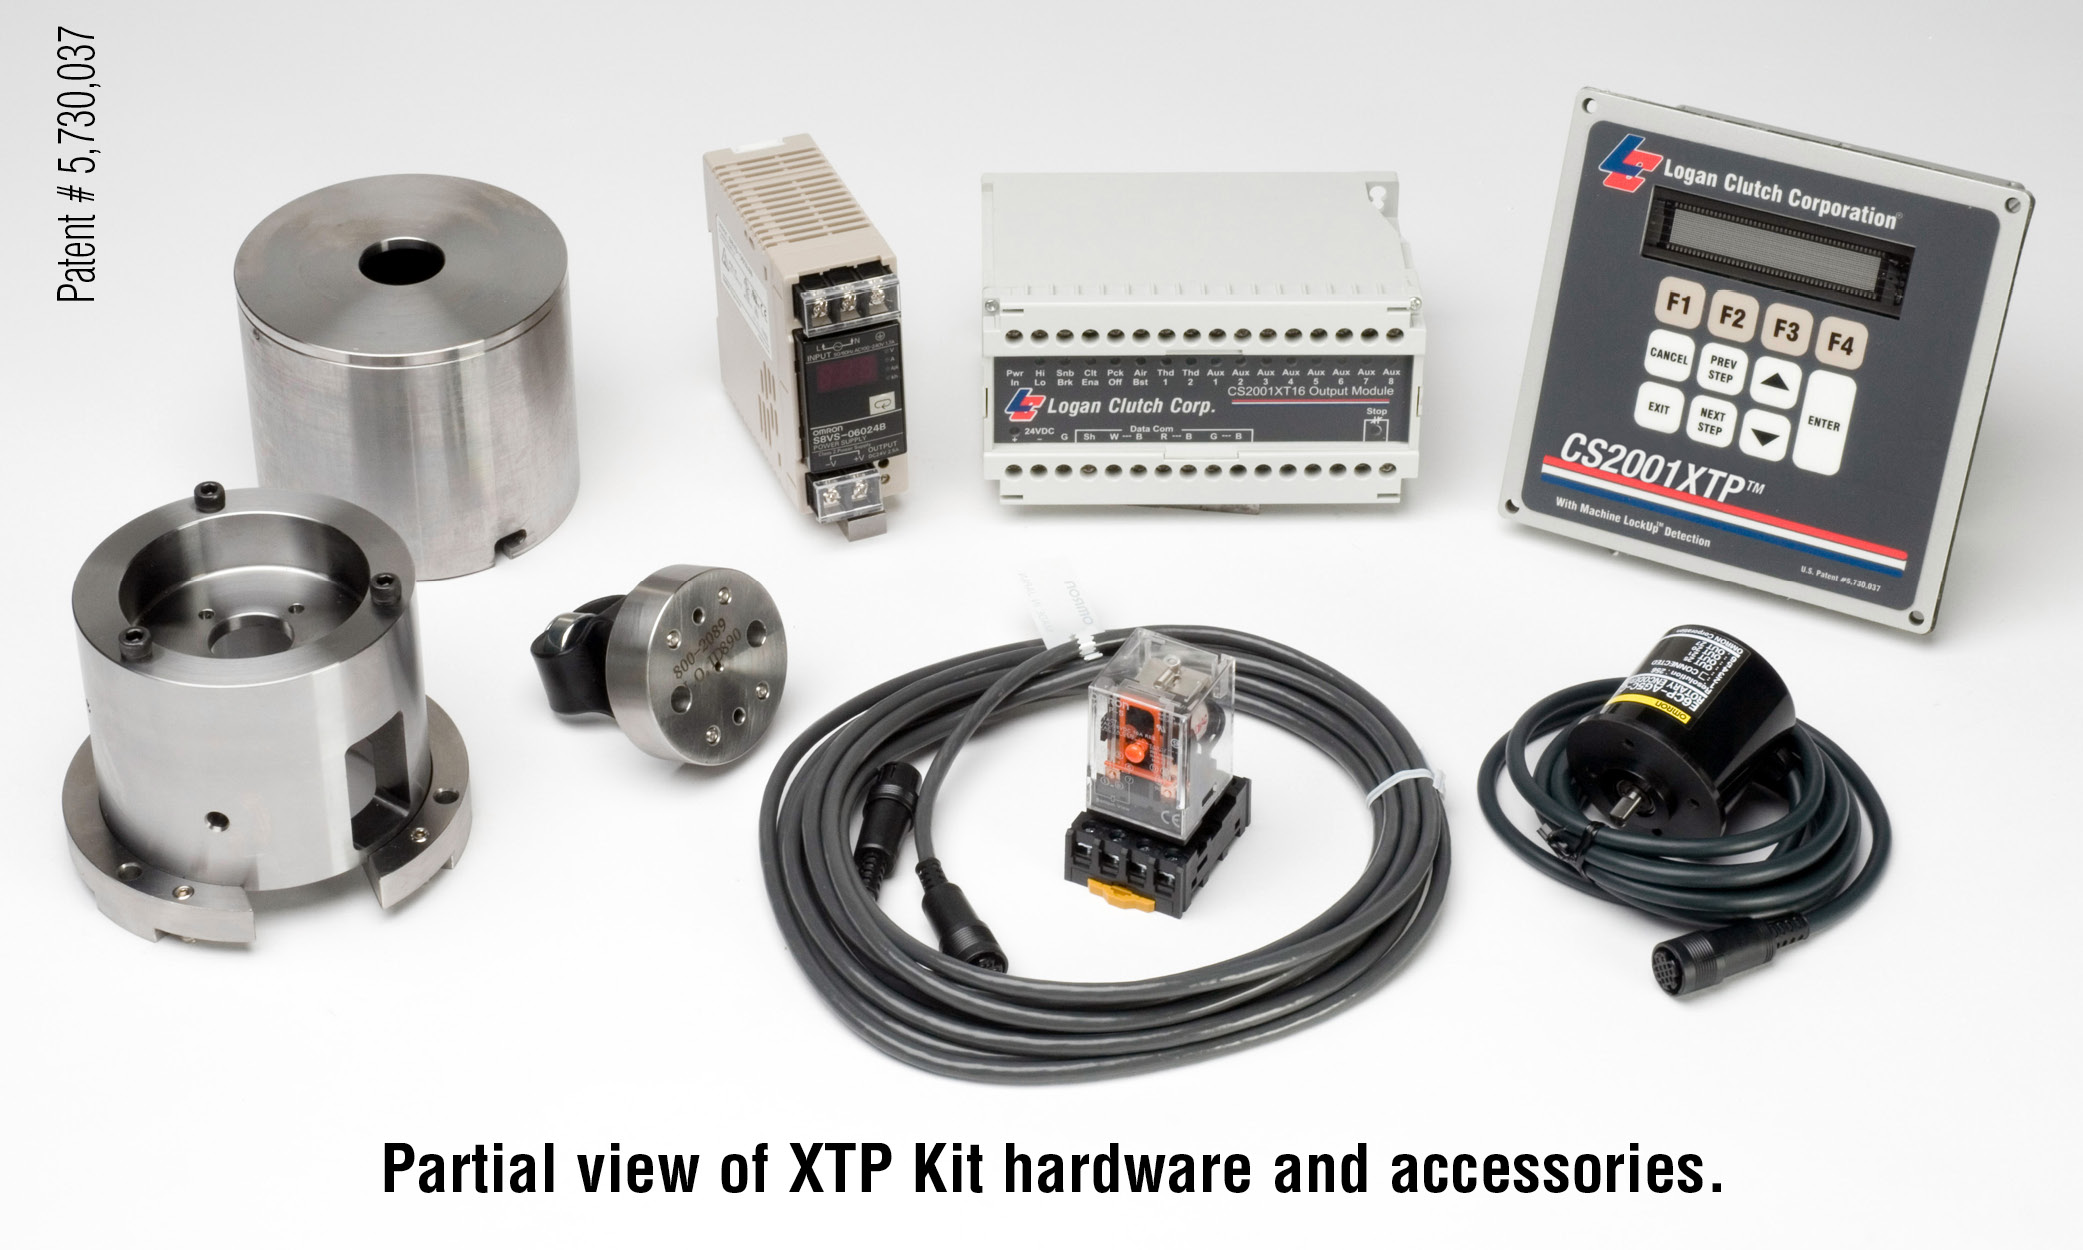 Partial view of XT kit hardware and accessories